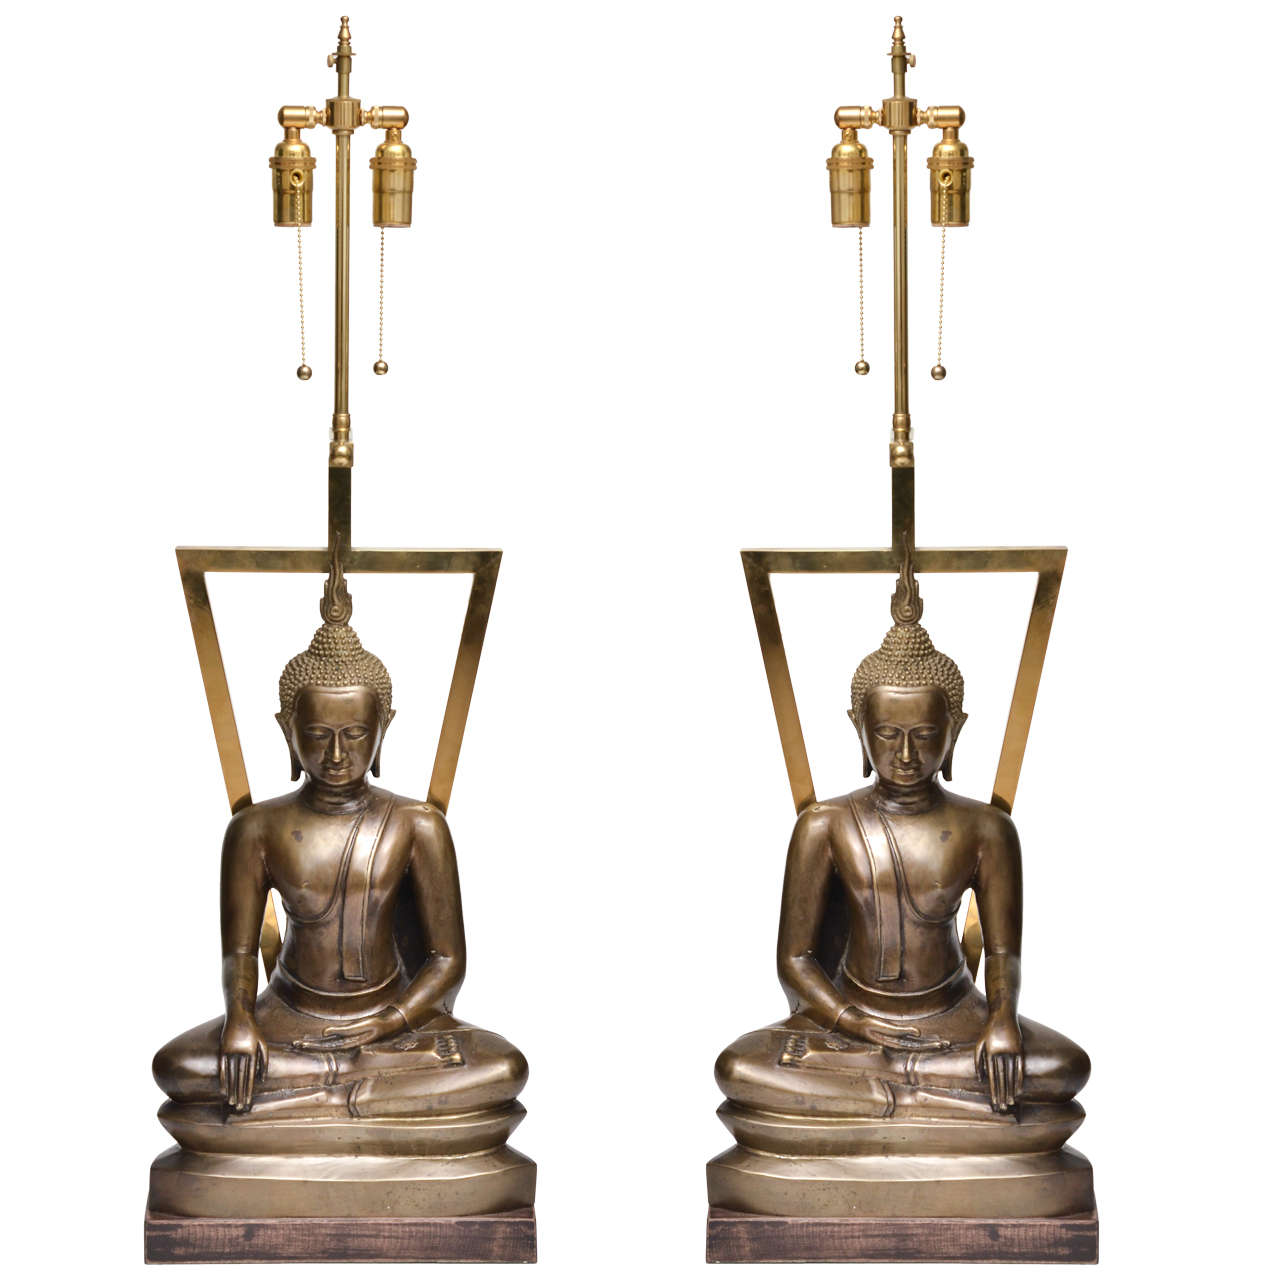 Pair of Sculptured Bronze Buddhist Asian Motif Table Lamps